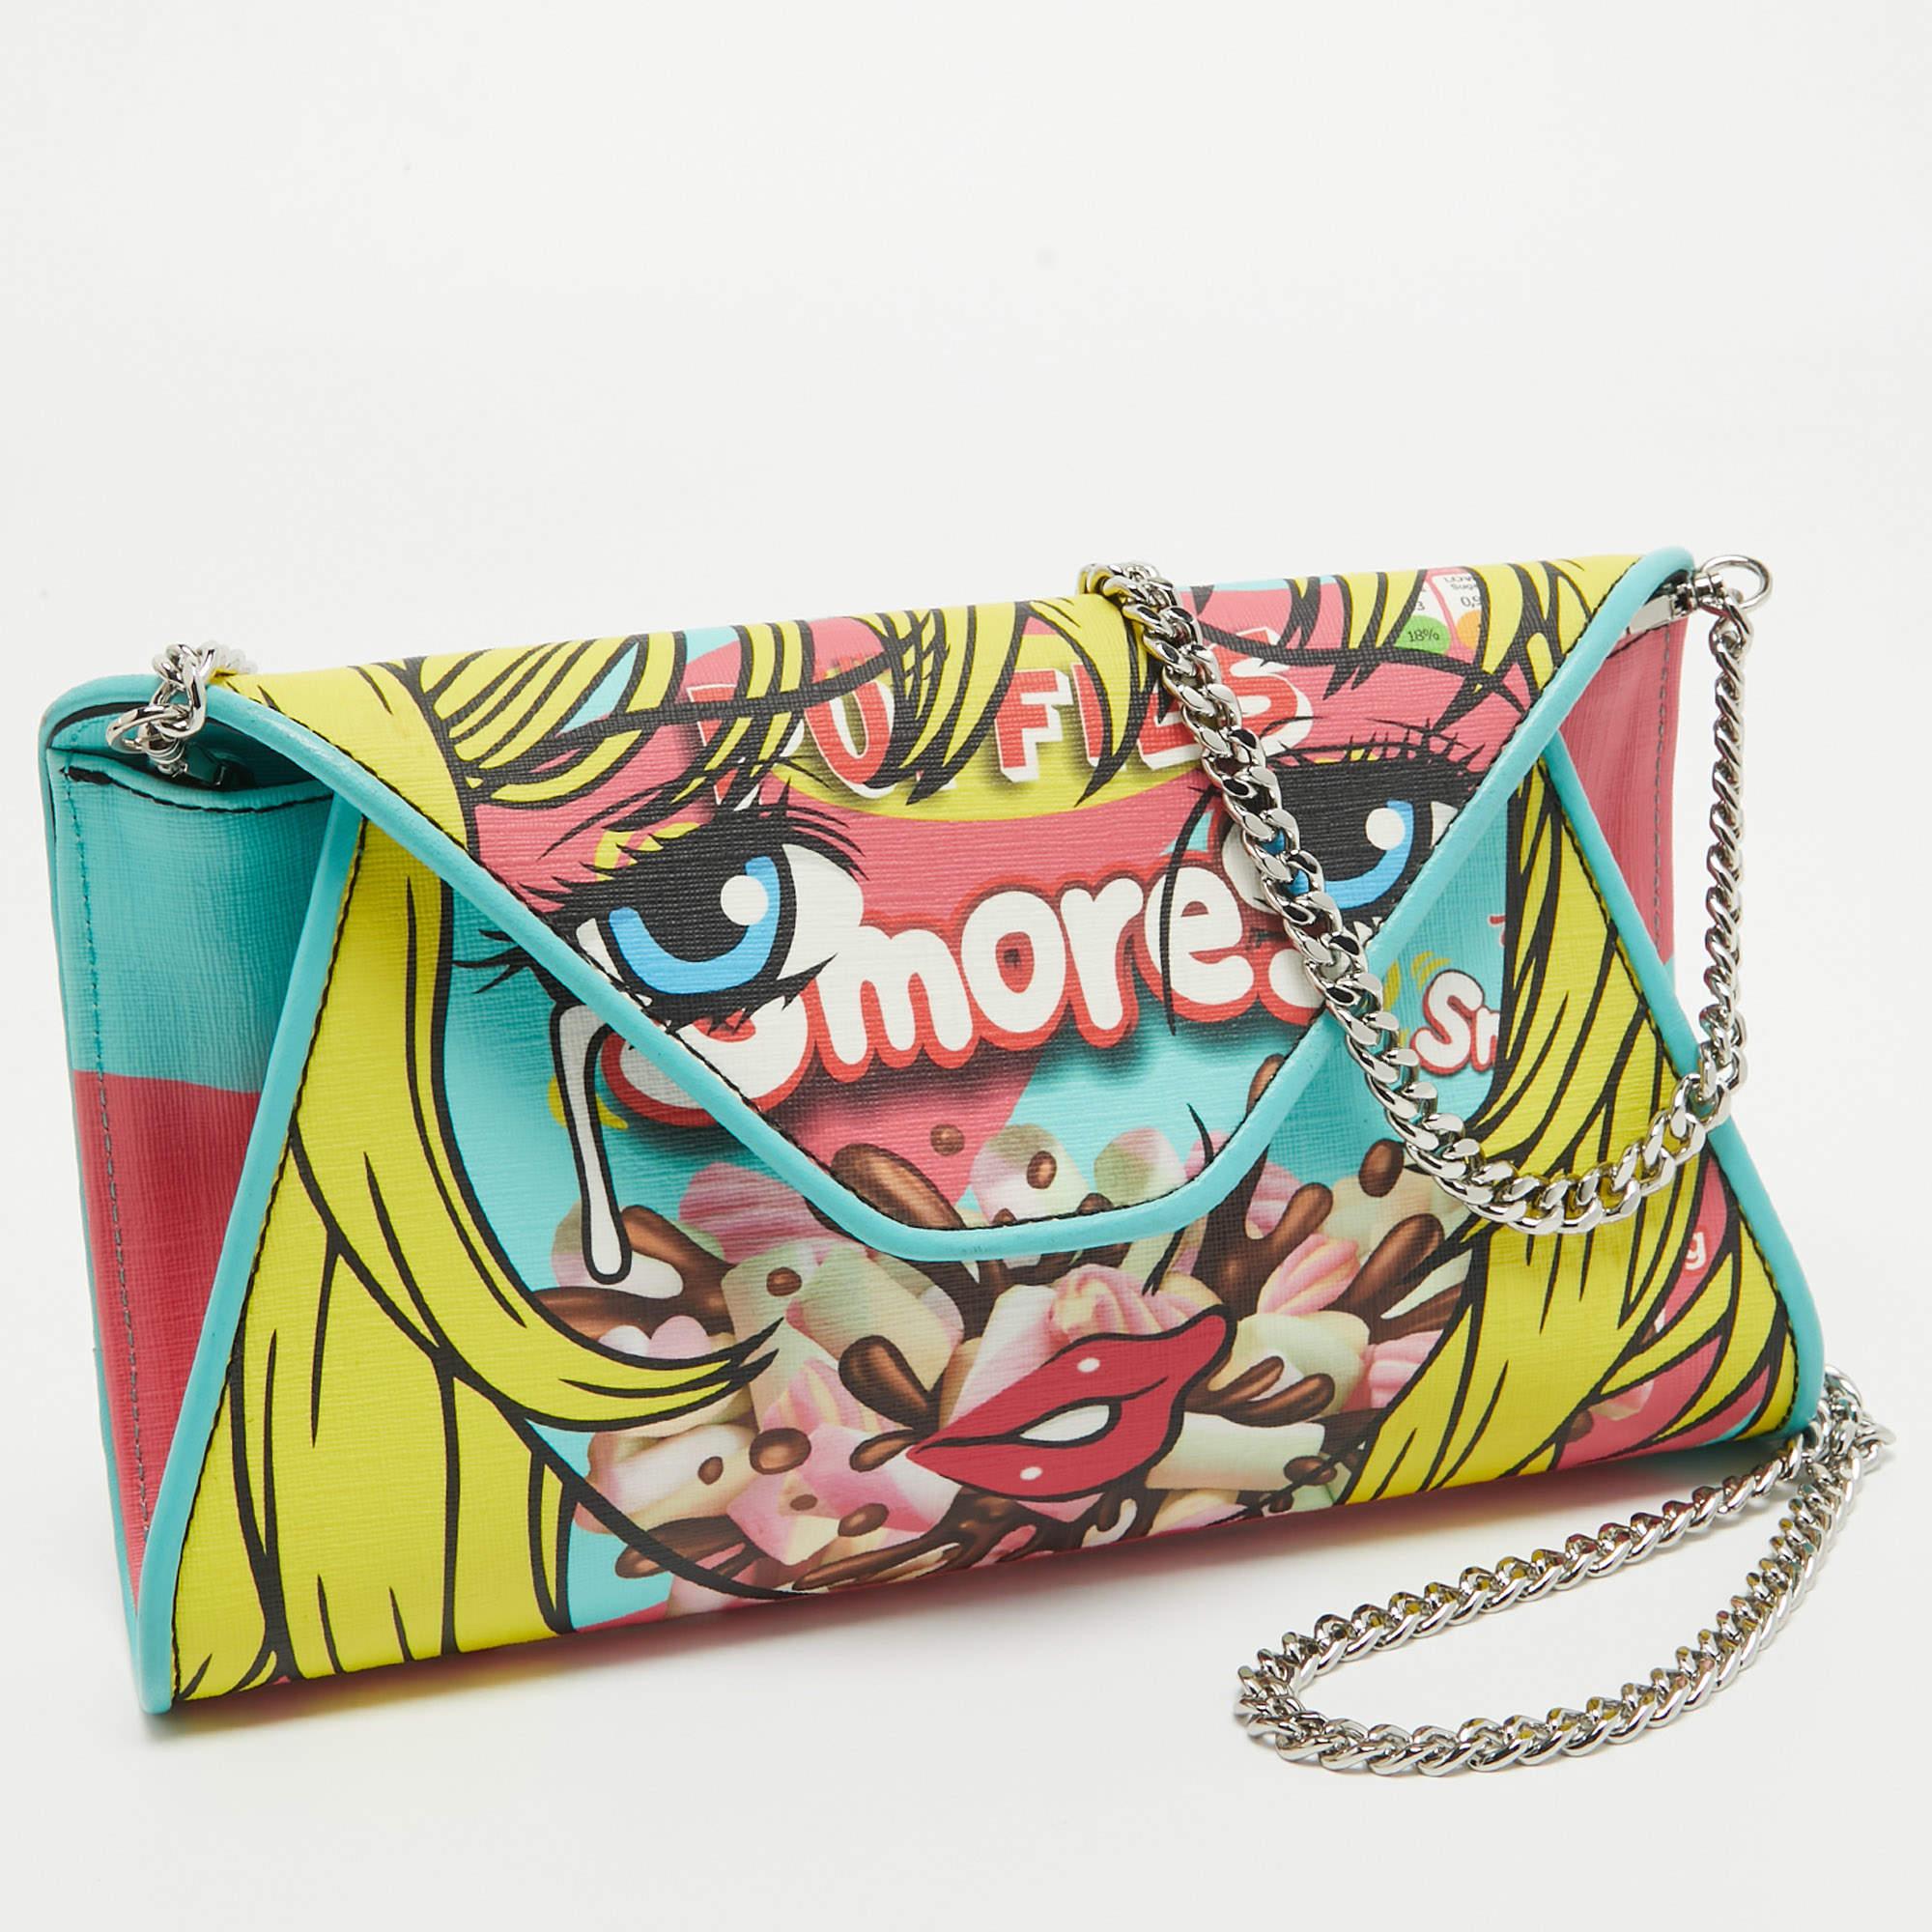 This lovely clutch by Moschino carries a fun design. It is crafted using canvas & leather with color prints on the exterior. It comes with a chain.

